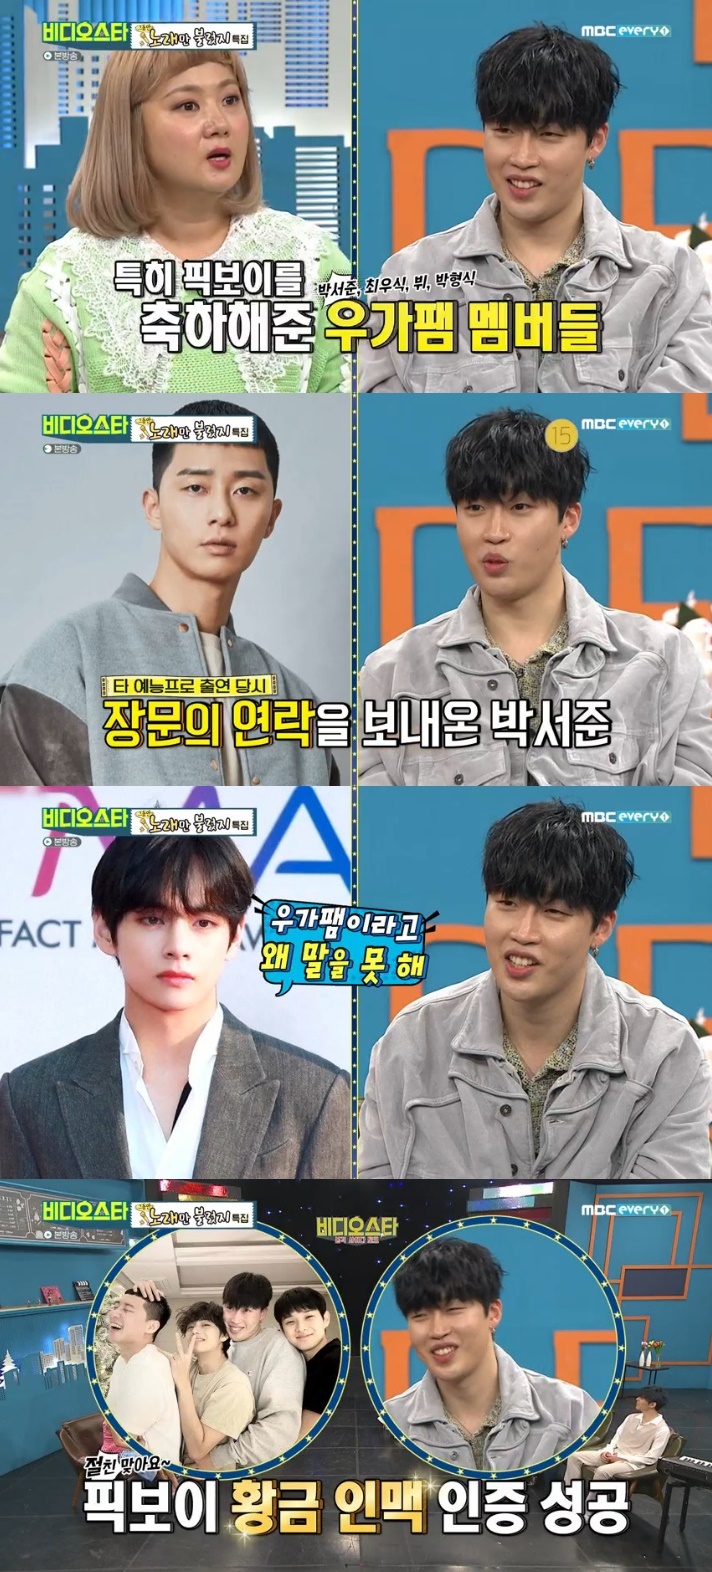 In MBC Everlon entertainment program Video Star, which was broadcast on the afternoon of the 28th, The Resurrection of Pigboy Crabshaw appeared as a guest and mentioned Woogapam (Park Seo-joon, Choi Woo-sik, BTS V, Park Hyung-sik).The Resurrection of Pigboy Crabshaw told best friends that he boasted of appearing in Video Star.He told me to do well, The Resurrection of Pigboy Crabshaw said.When I went to other entertainments, I got a long text from Park Seo-joon, and I ran it about three times and it was said that it was wobbly.I know all the hard times, he added.Especially about V, I told him to make sure if he was going to talk about (Woogapam) and I was kind of afraid he would avoid it, he said, shyly confiding that he was close. close.Meanwhile, The Resurrection of Pigboy Crabshaw also confesses to celebrity illnesses; he spoke out, saying, There are no entertainers but the suspicions amplified (????????????????????????????????????????????????), and said, I think the initial symptoms have come a little.The Resurrection of Pigboy Crabshaw said: I actually love being a station, dont you think its amazing to see celebrities?I think thats why I had an early symptom, but now Im in the process of treatment. Im self-medicating. 